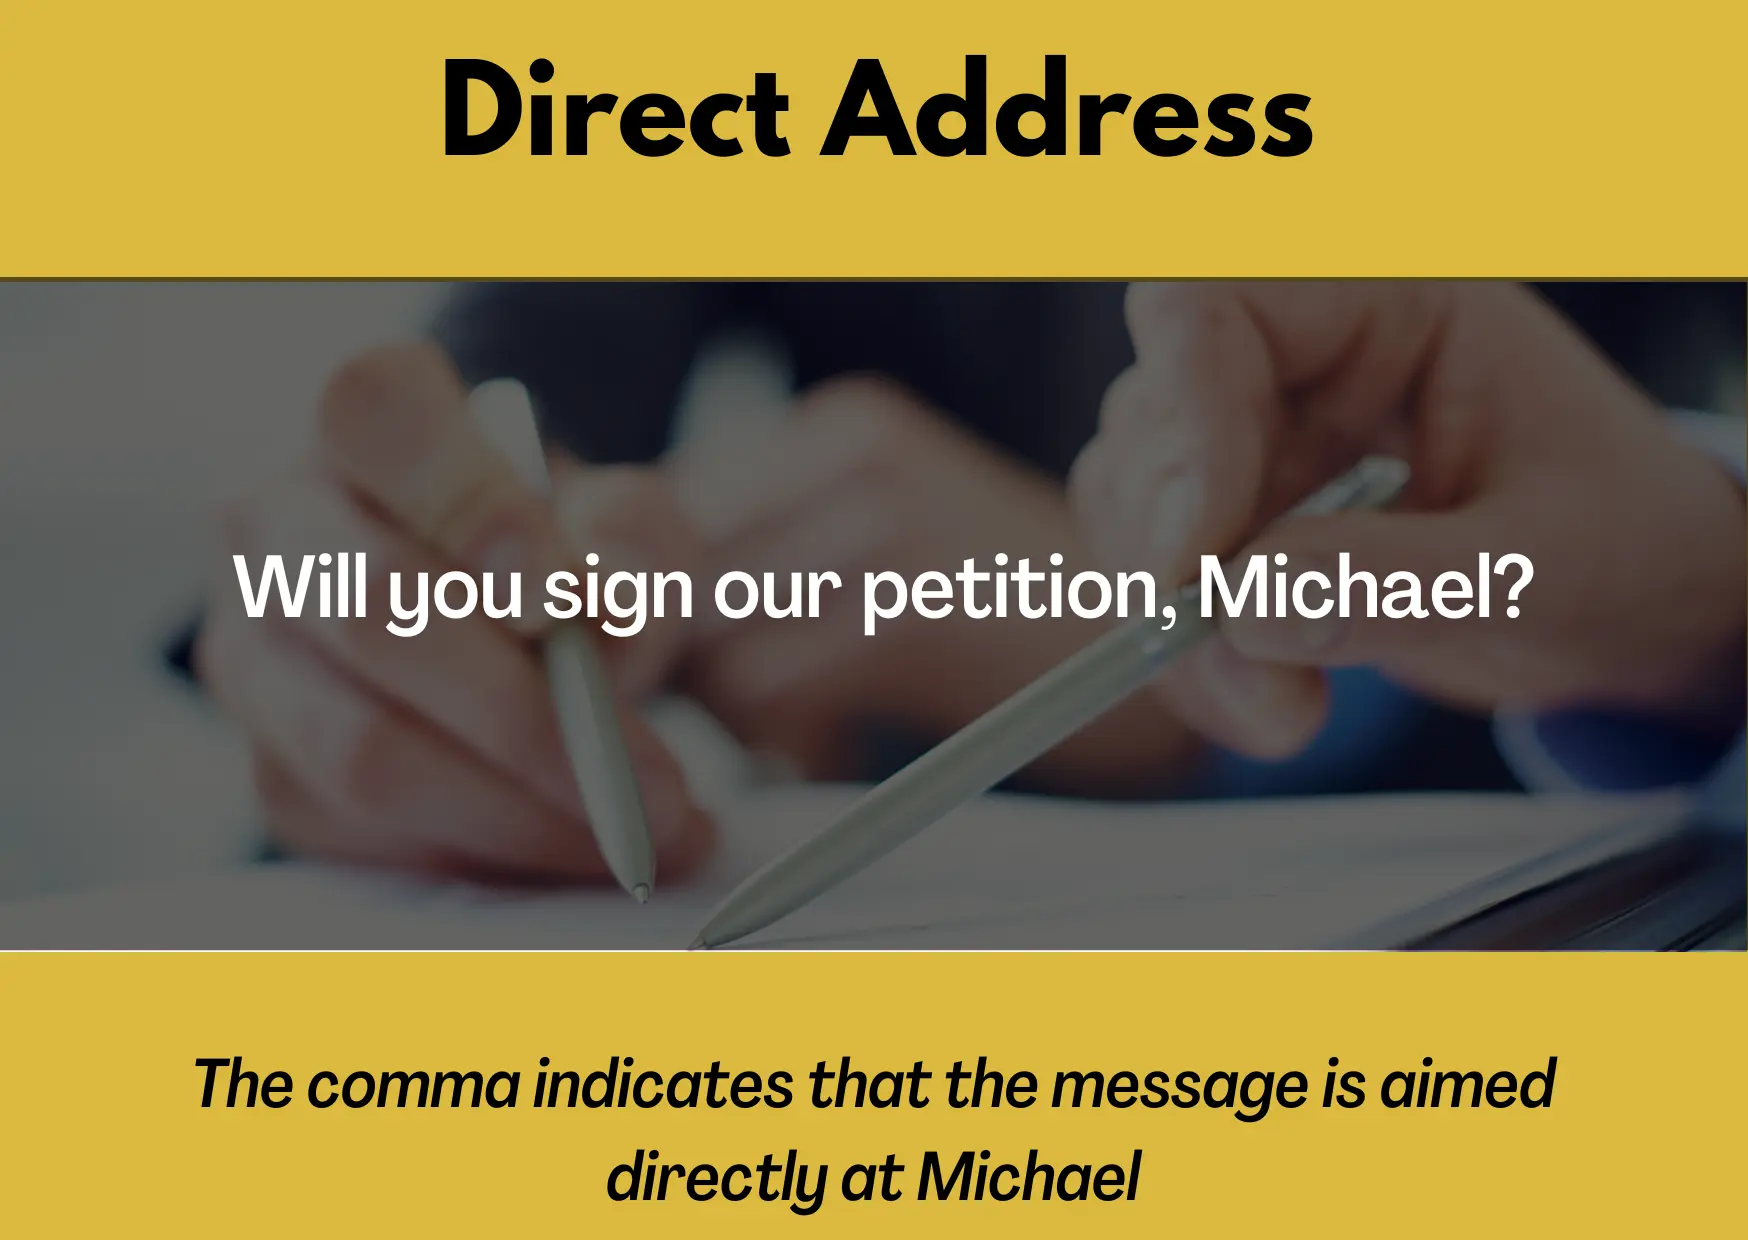 A graphic explaining direct address with an example: "Will you sign our petition, Michael?" The comma indicates that the message is aimed directly at Michael.